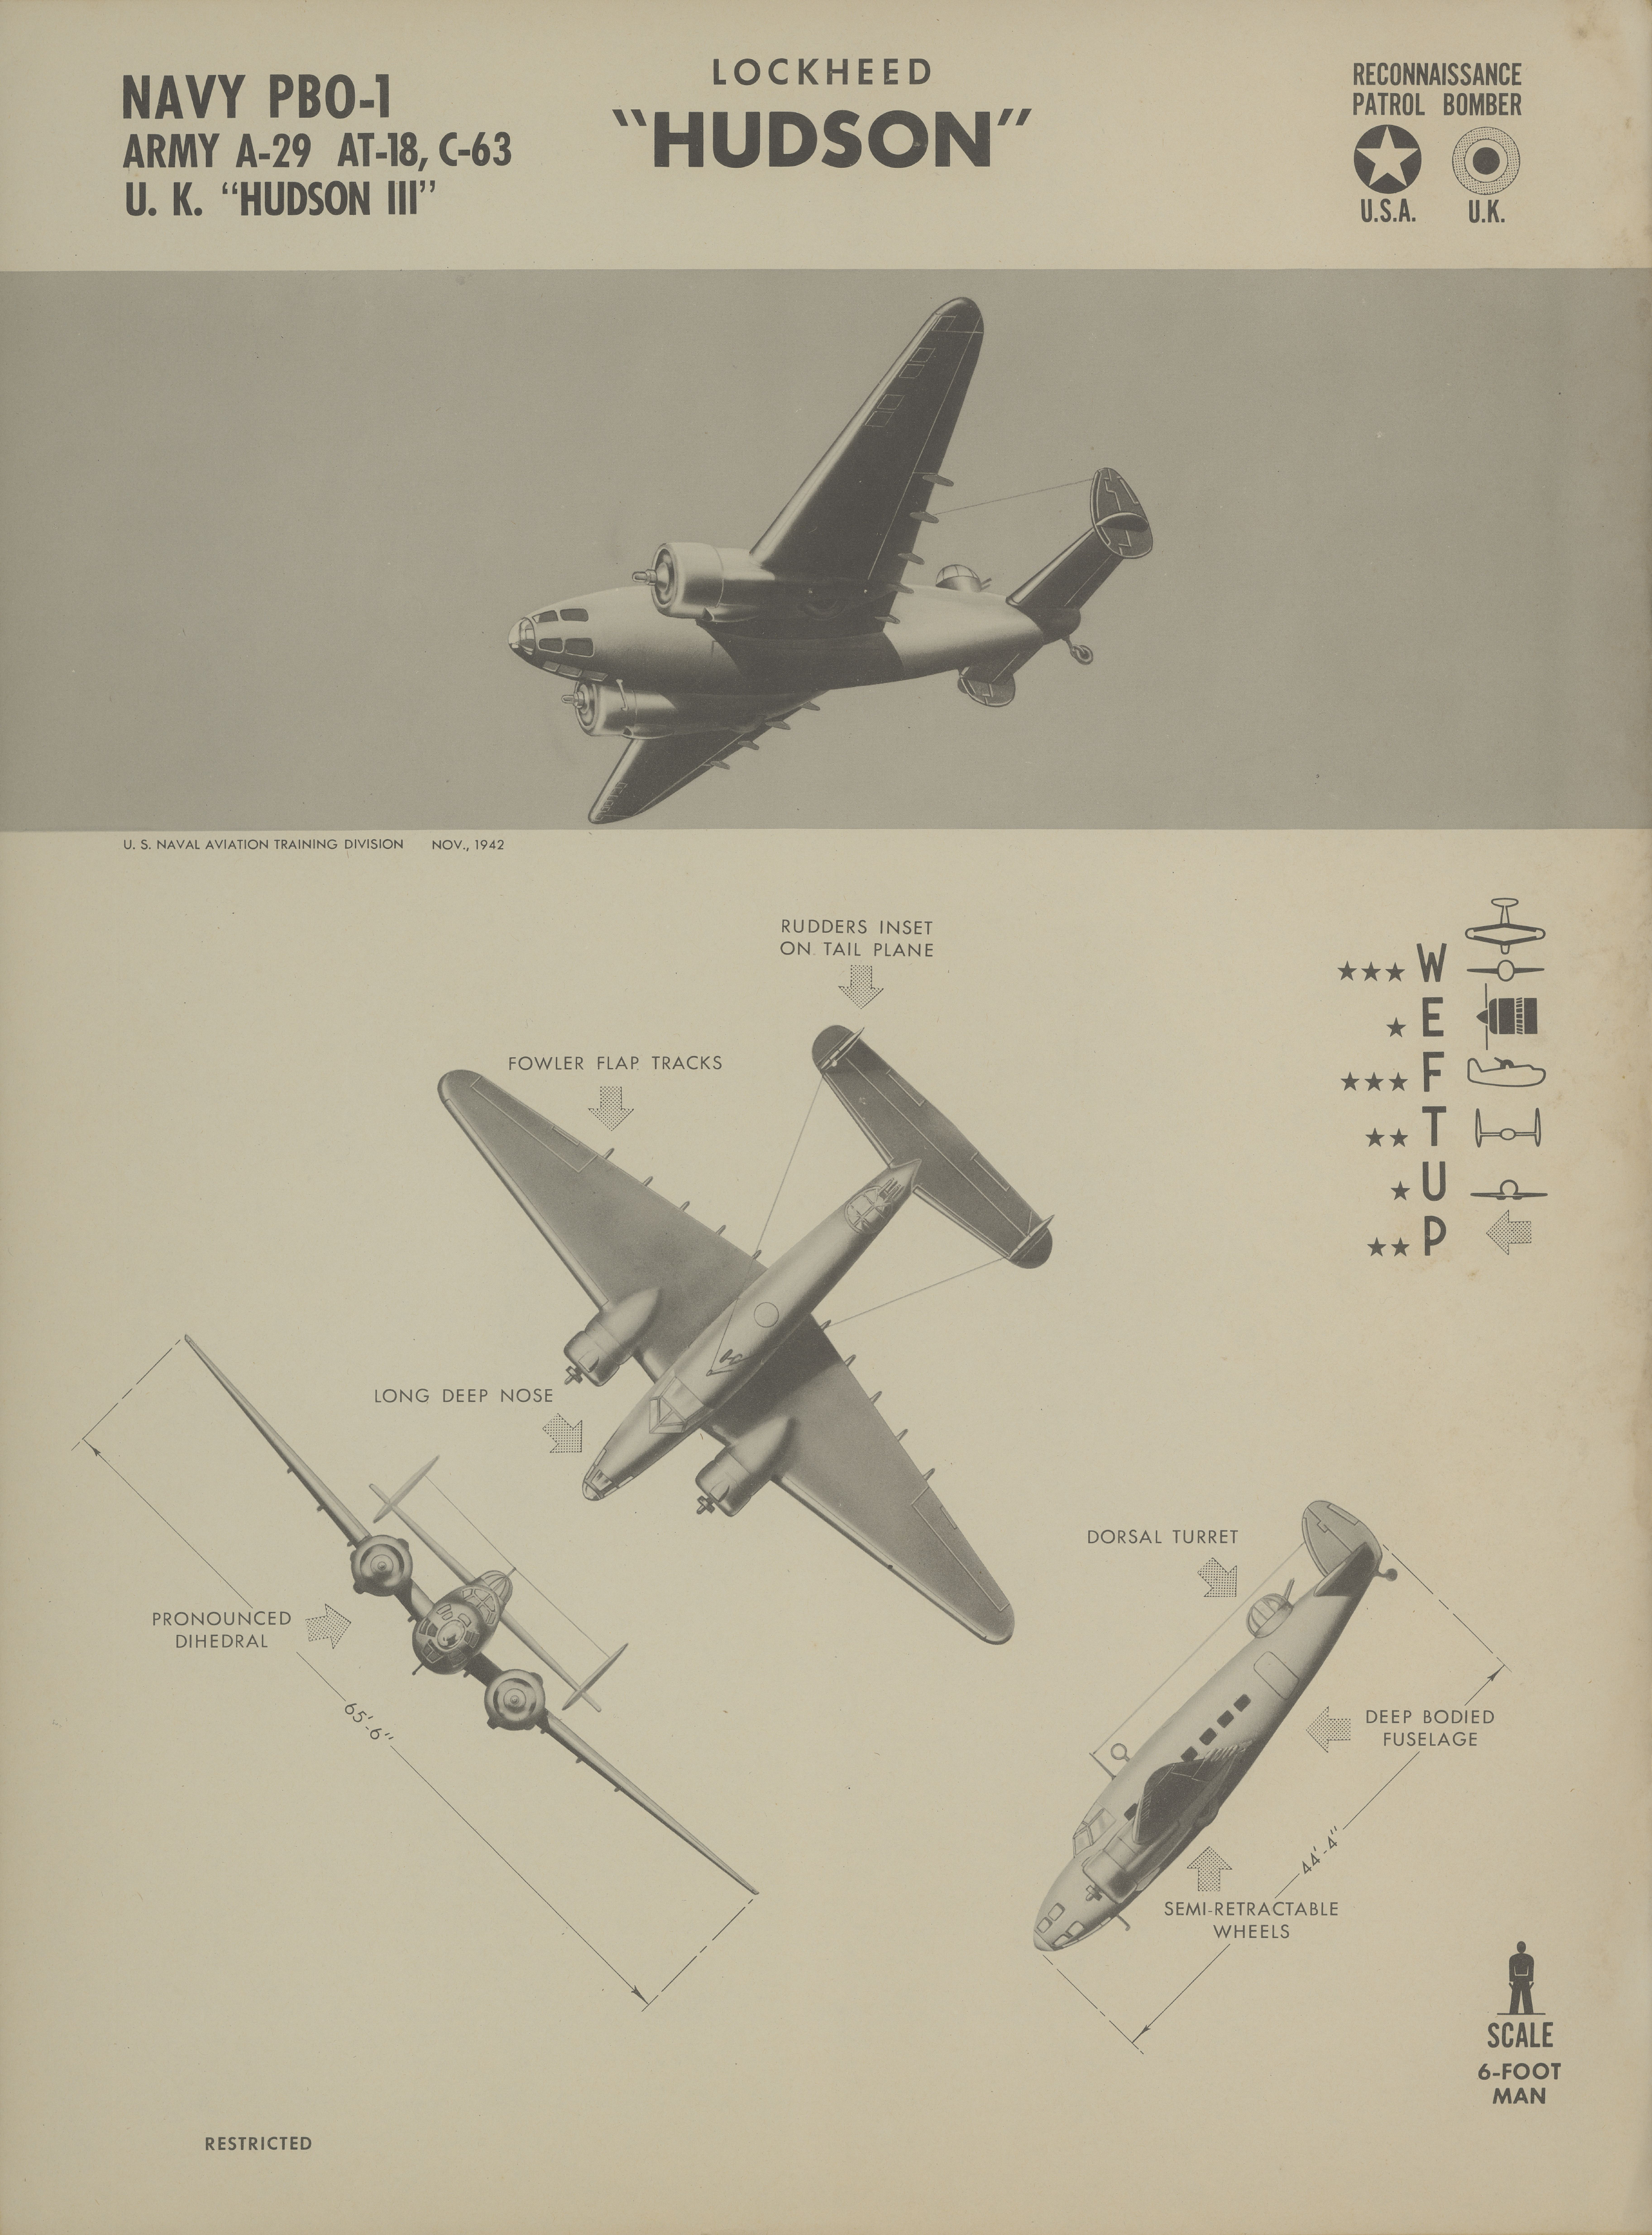 Sample page 1 from AirCorps Library document: A-29, AT-18, C-63 Hudson Recognition Poster